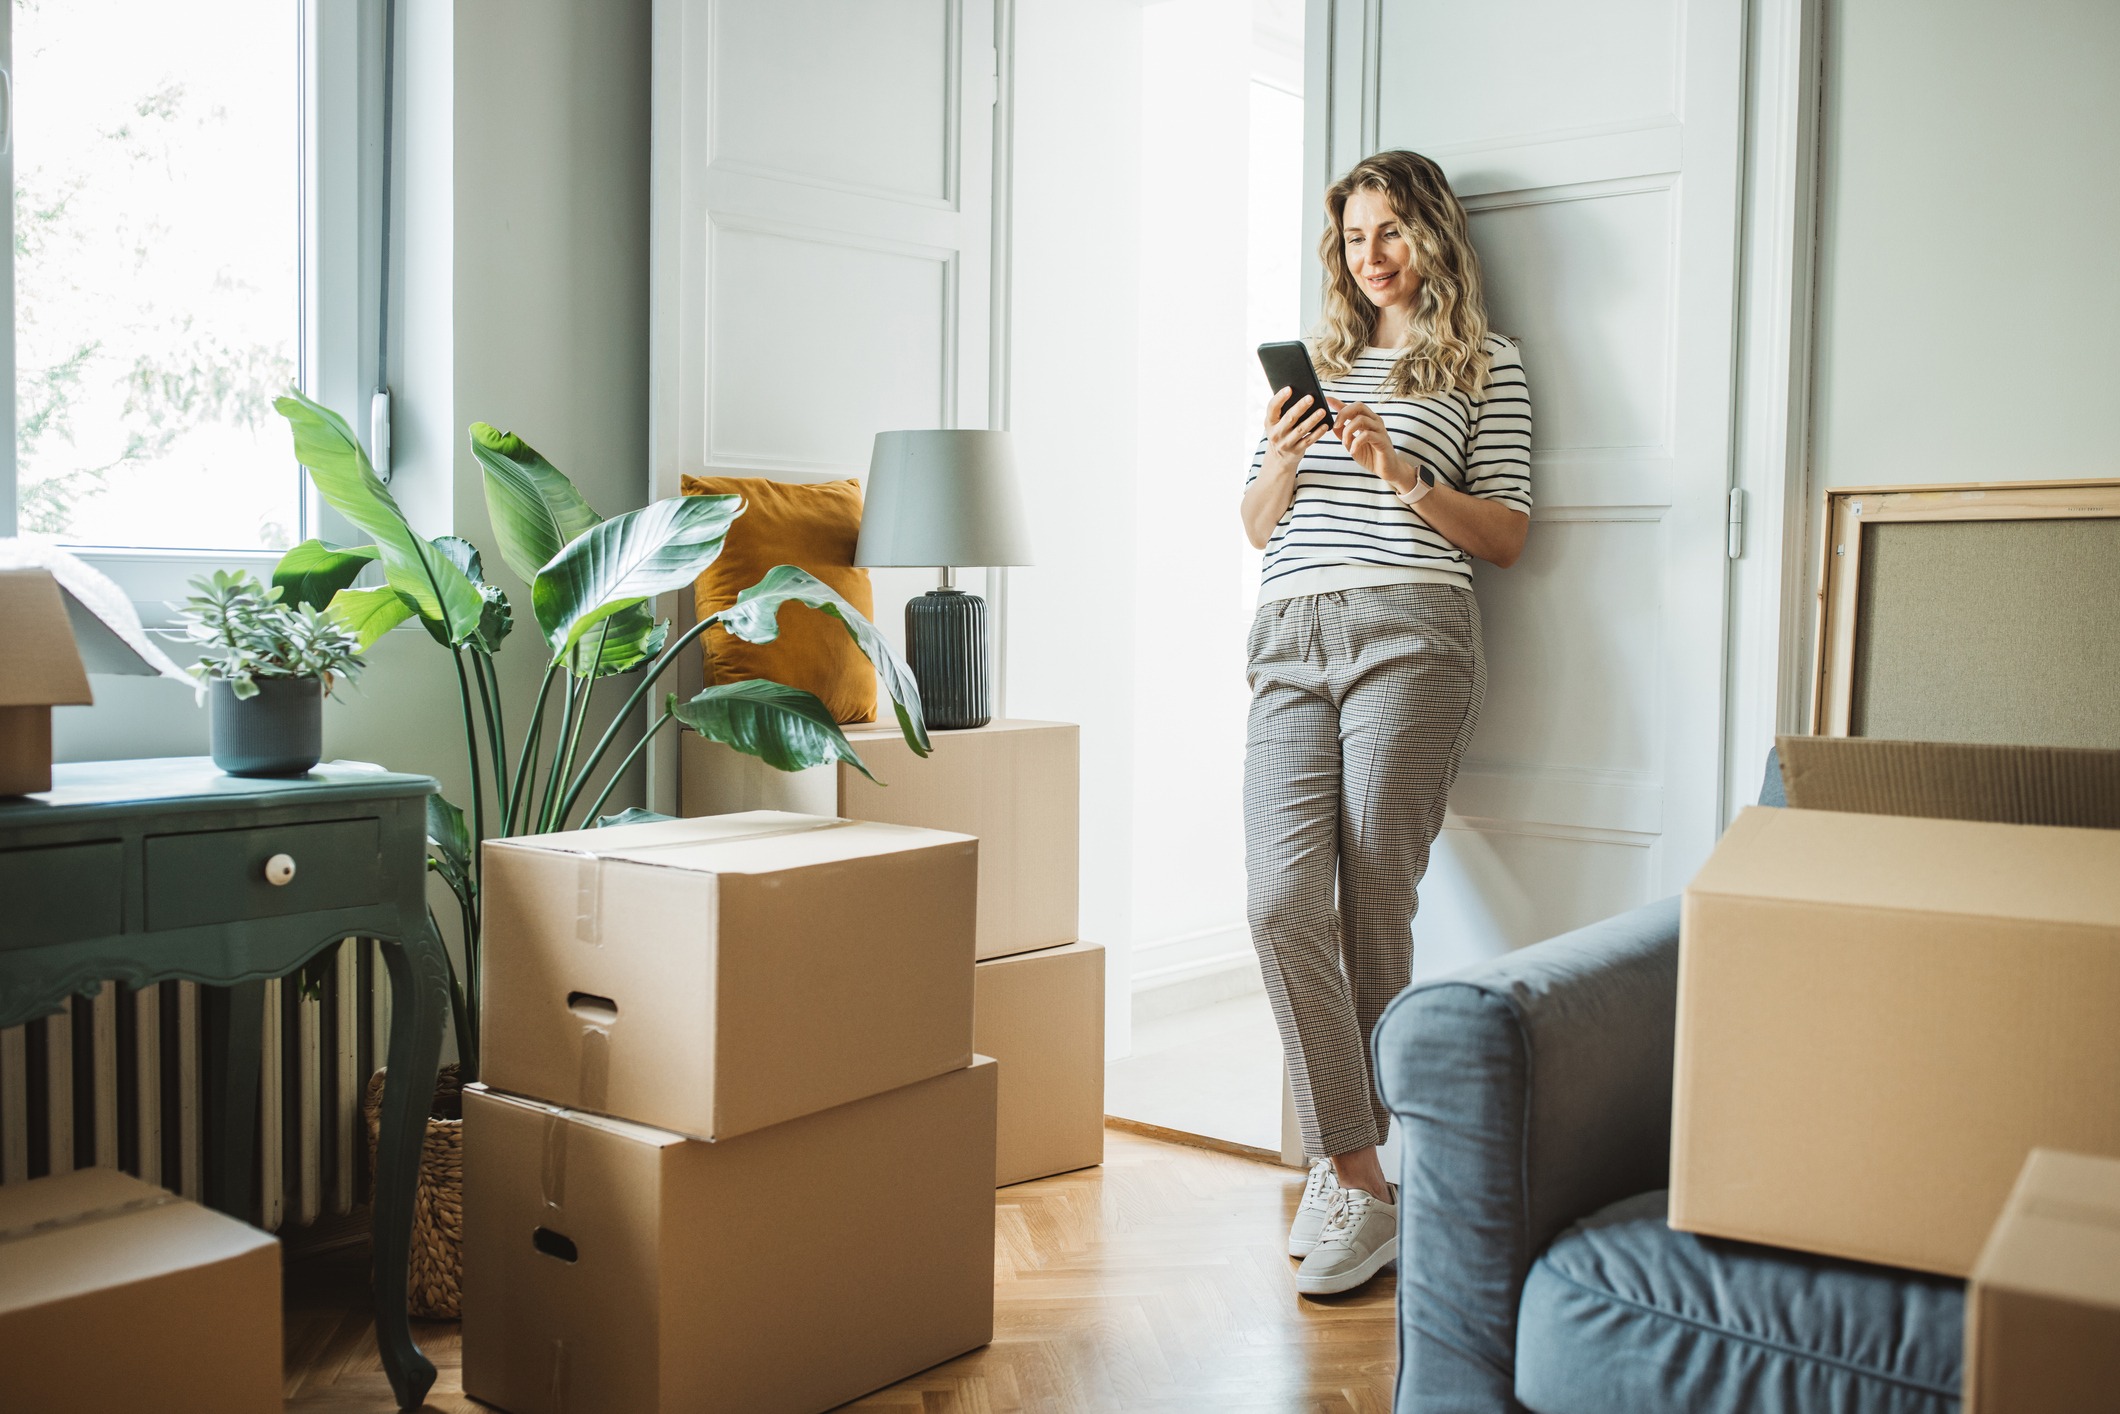 A woman surrounded by moving boxes in her home orders a moving service on her phone.